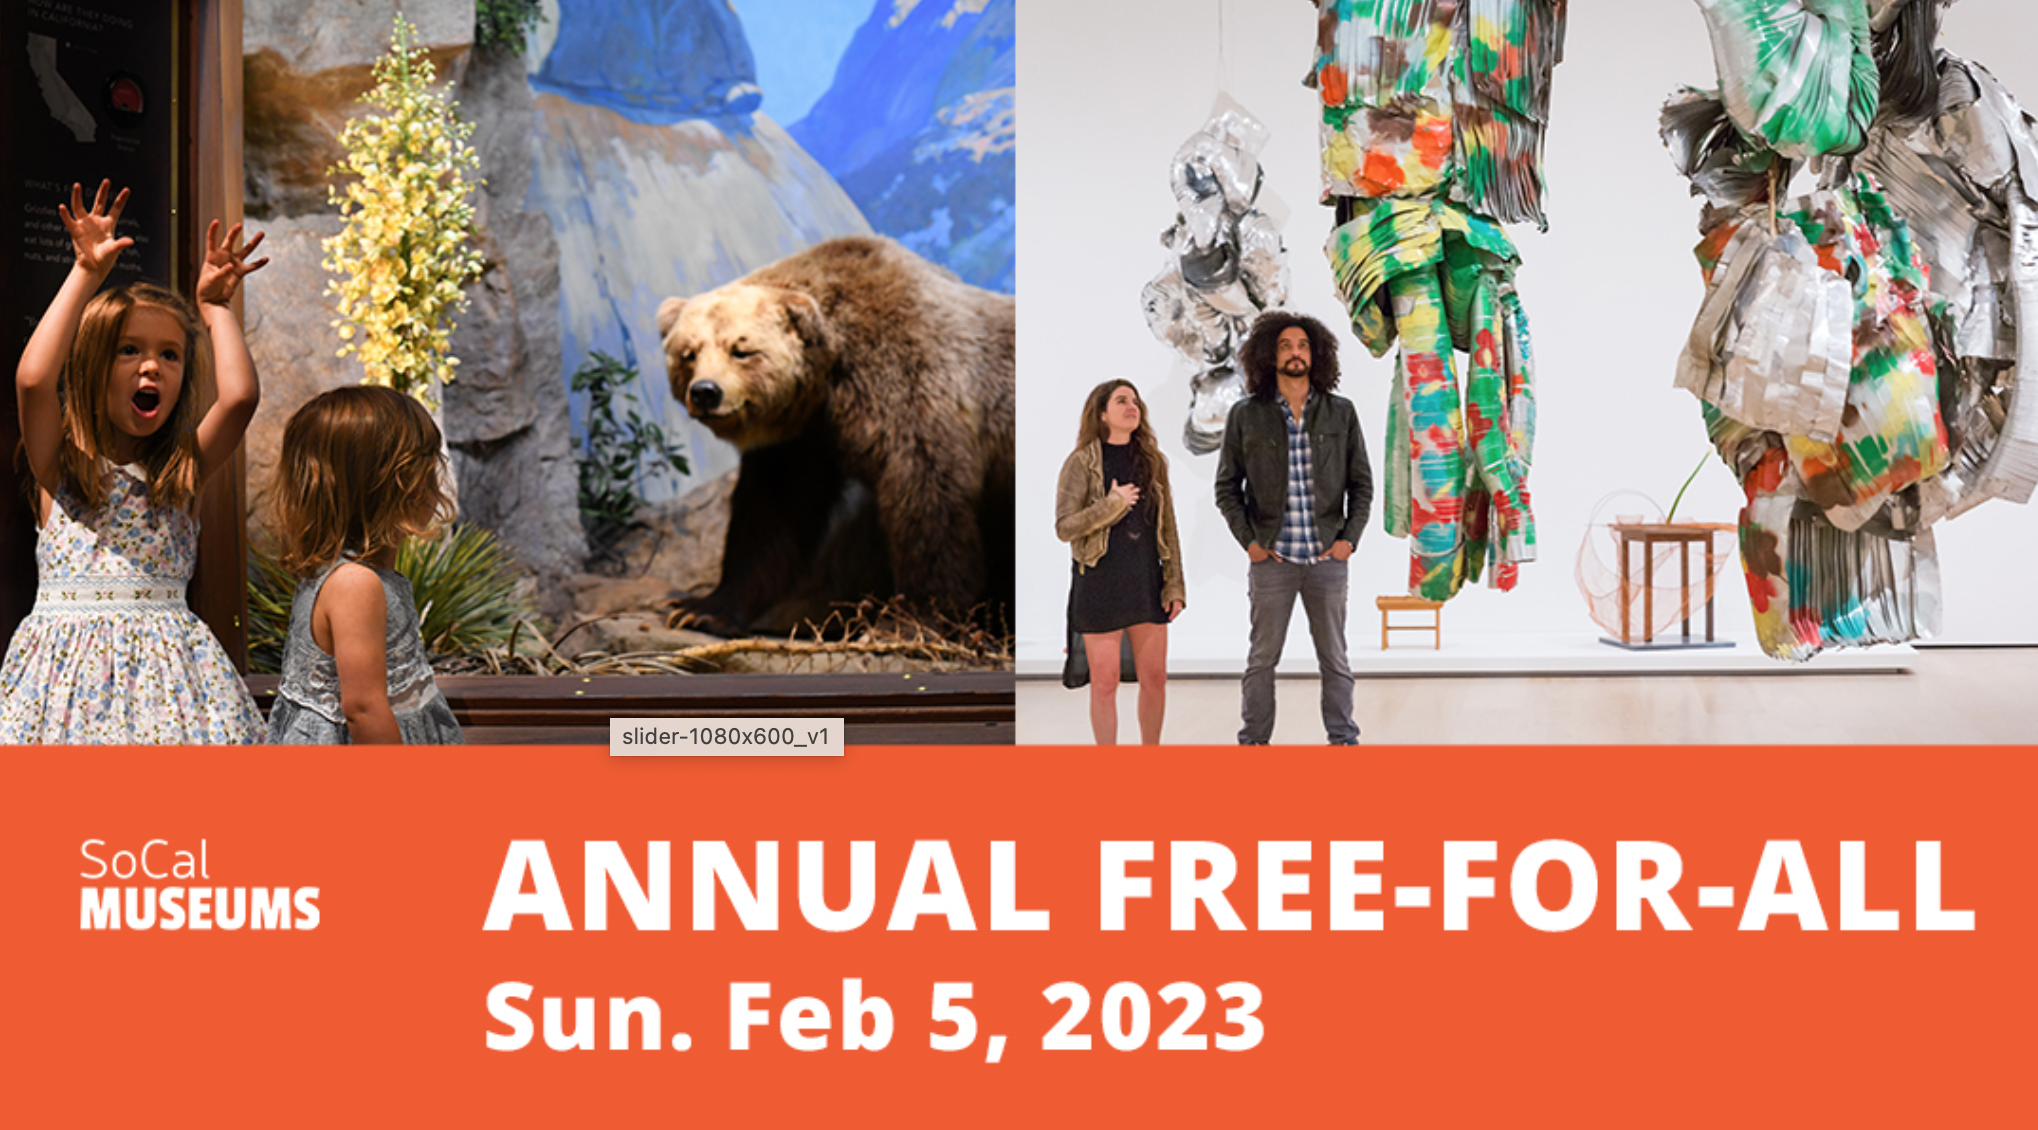 February 5th • FREE MUSEUMS